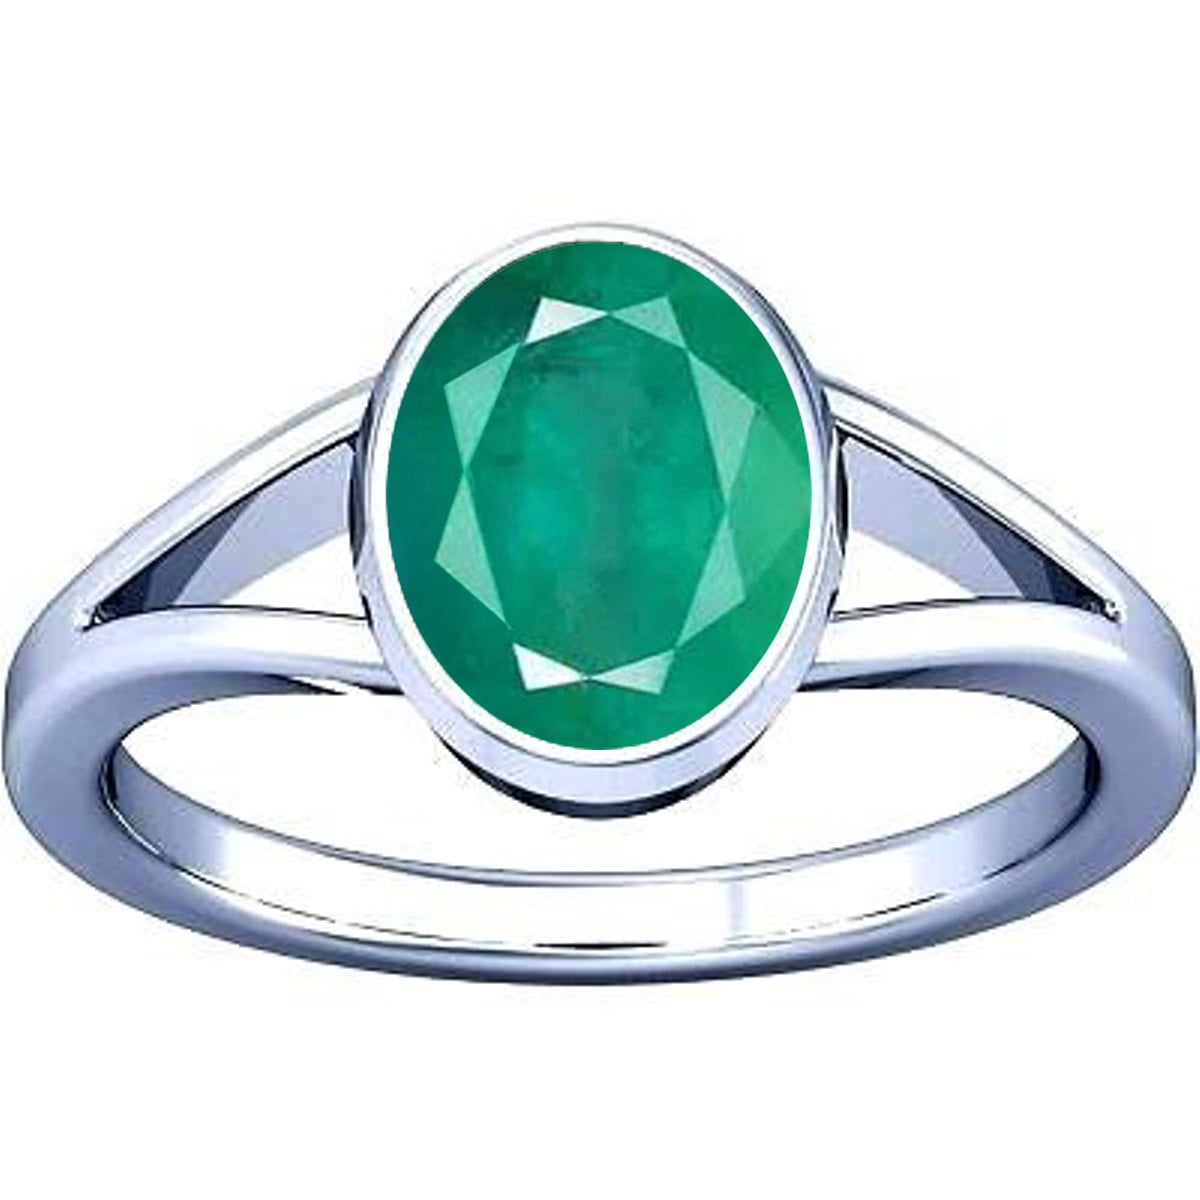 Amazon.com: Gold Ring Emerald Panna Stone 92.5 Sterling Silver Adjustable  Panchdhatu Ring by Arihant Gems and Jewels : Clothing, Shoes & Jewelry